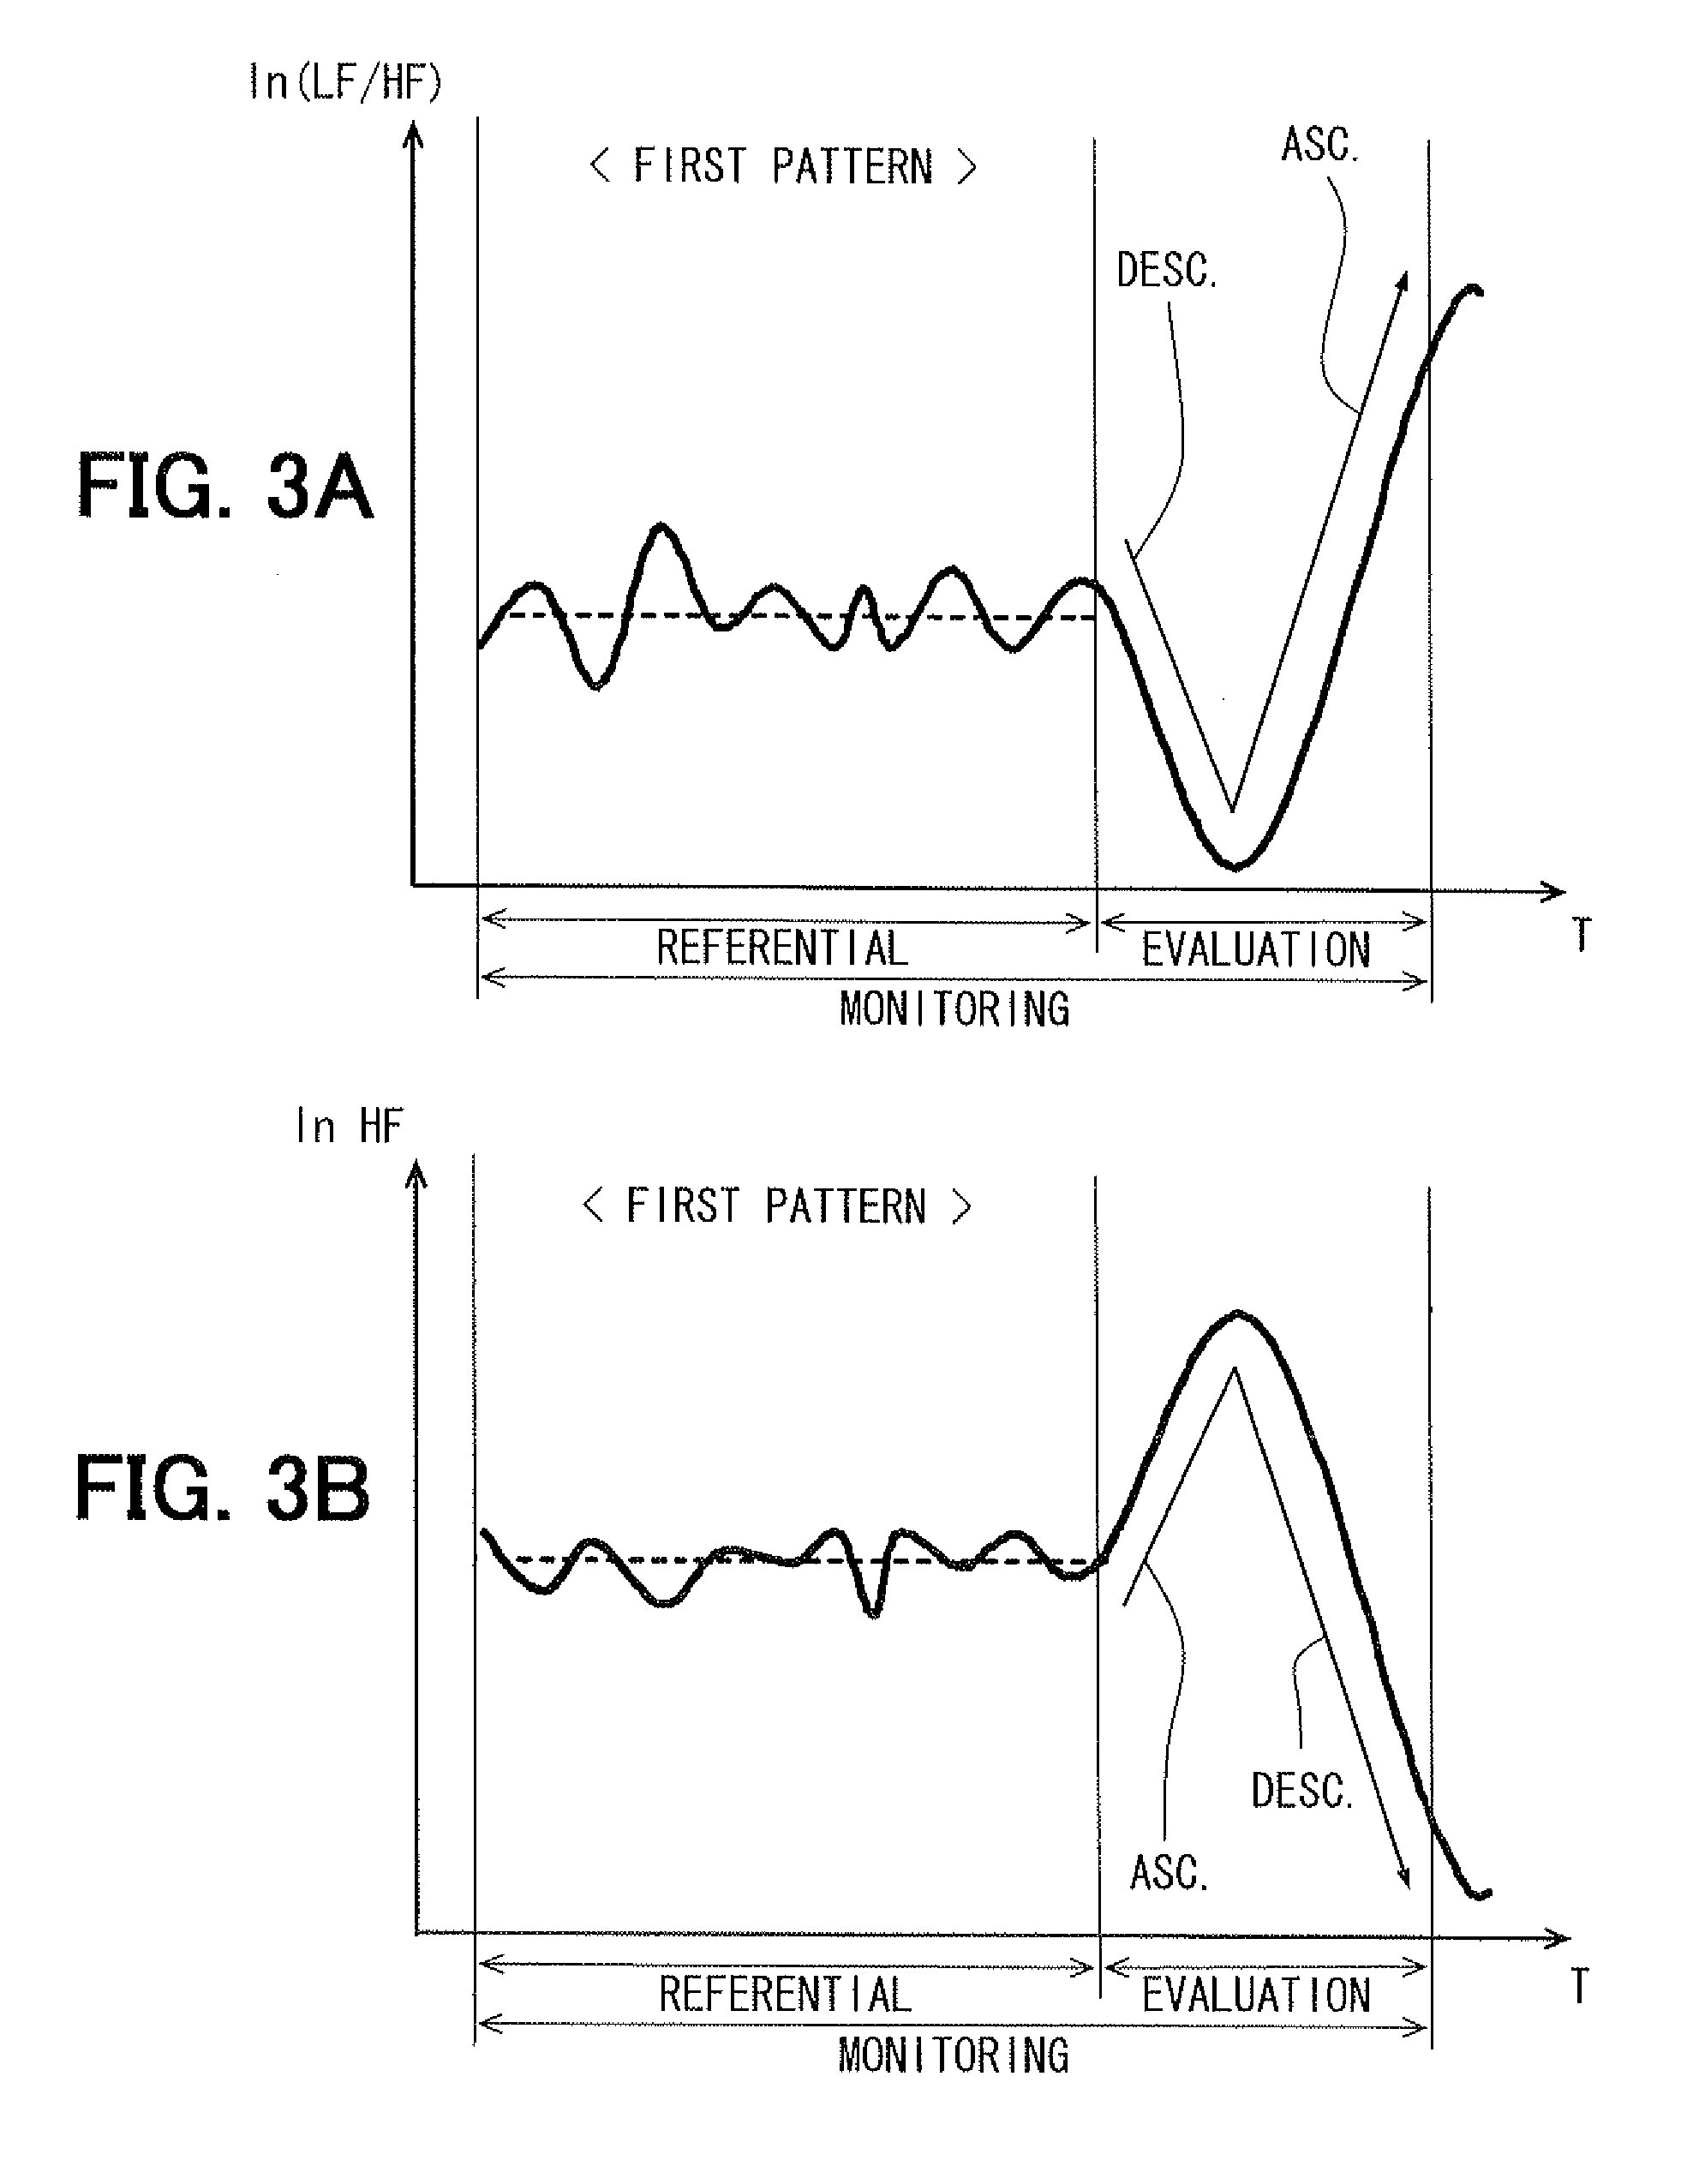 Apparatus for evaluating biological condition, method for the same, and computer program product